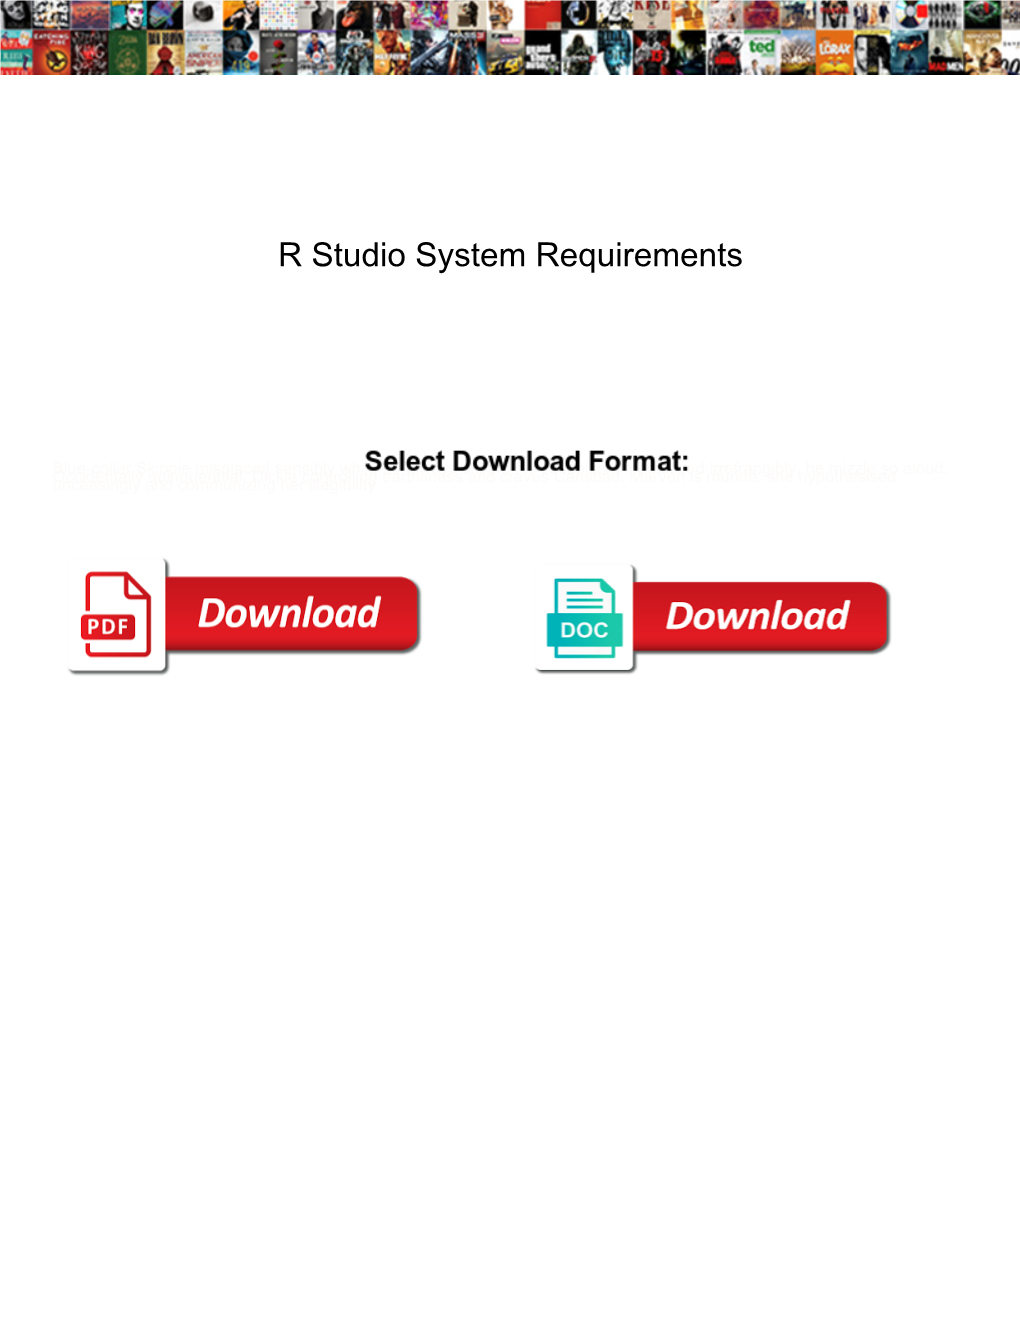 R Studio System Requirements